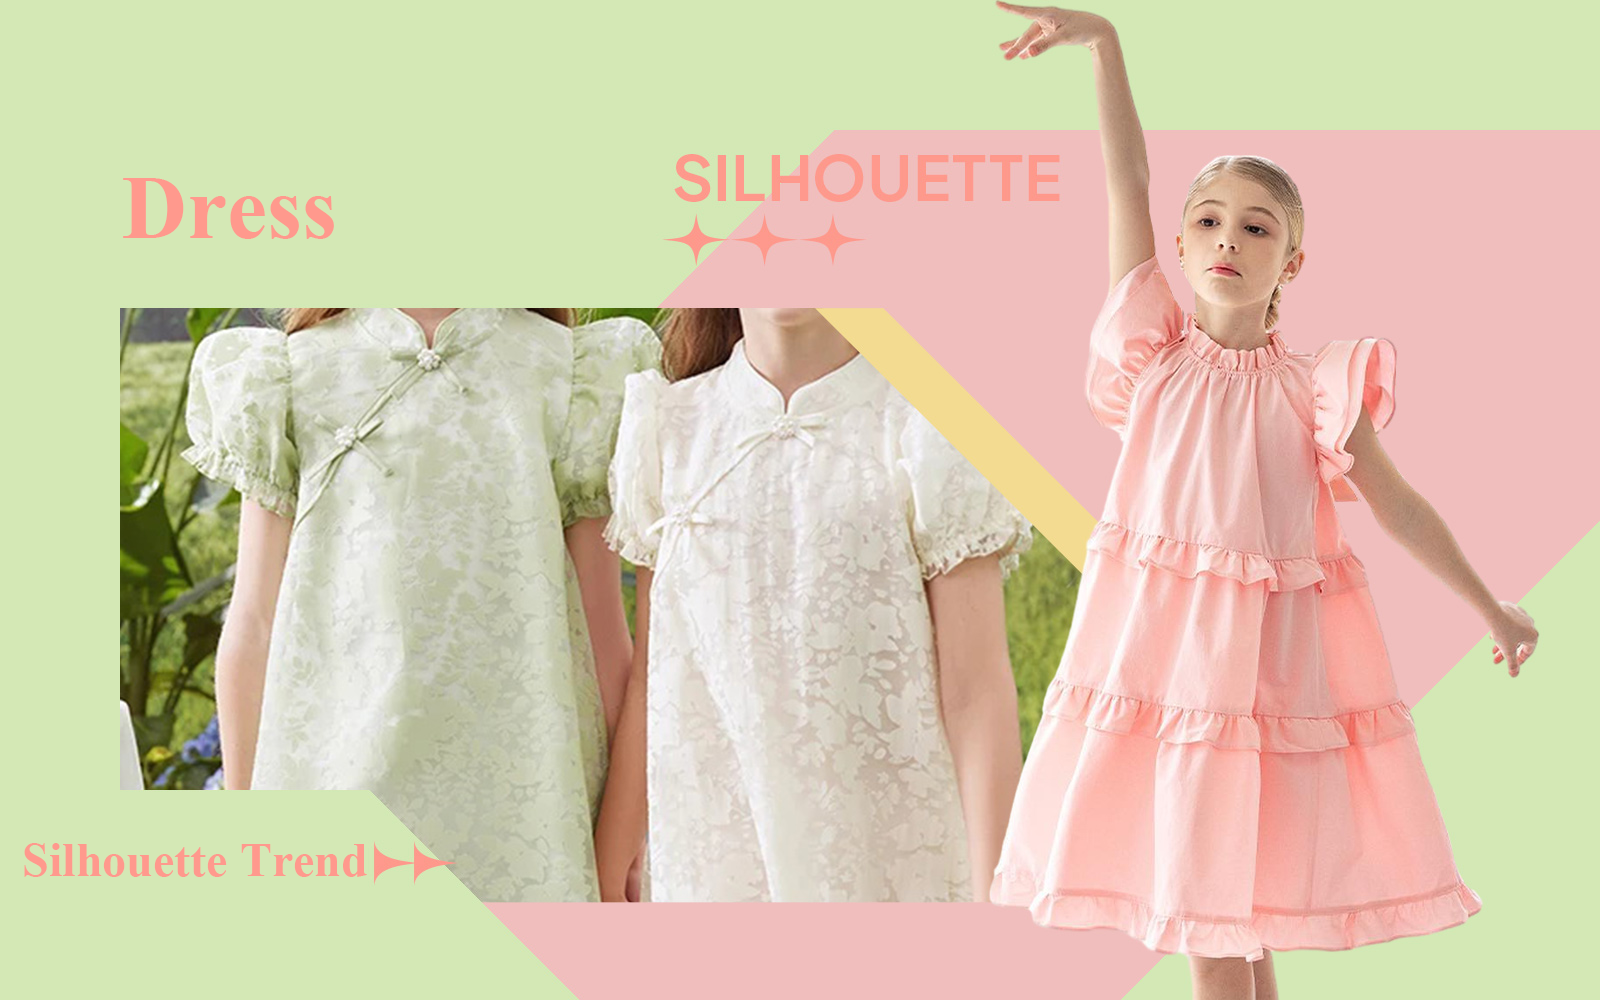 The Silhouette Trend for Kids' Dress